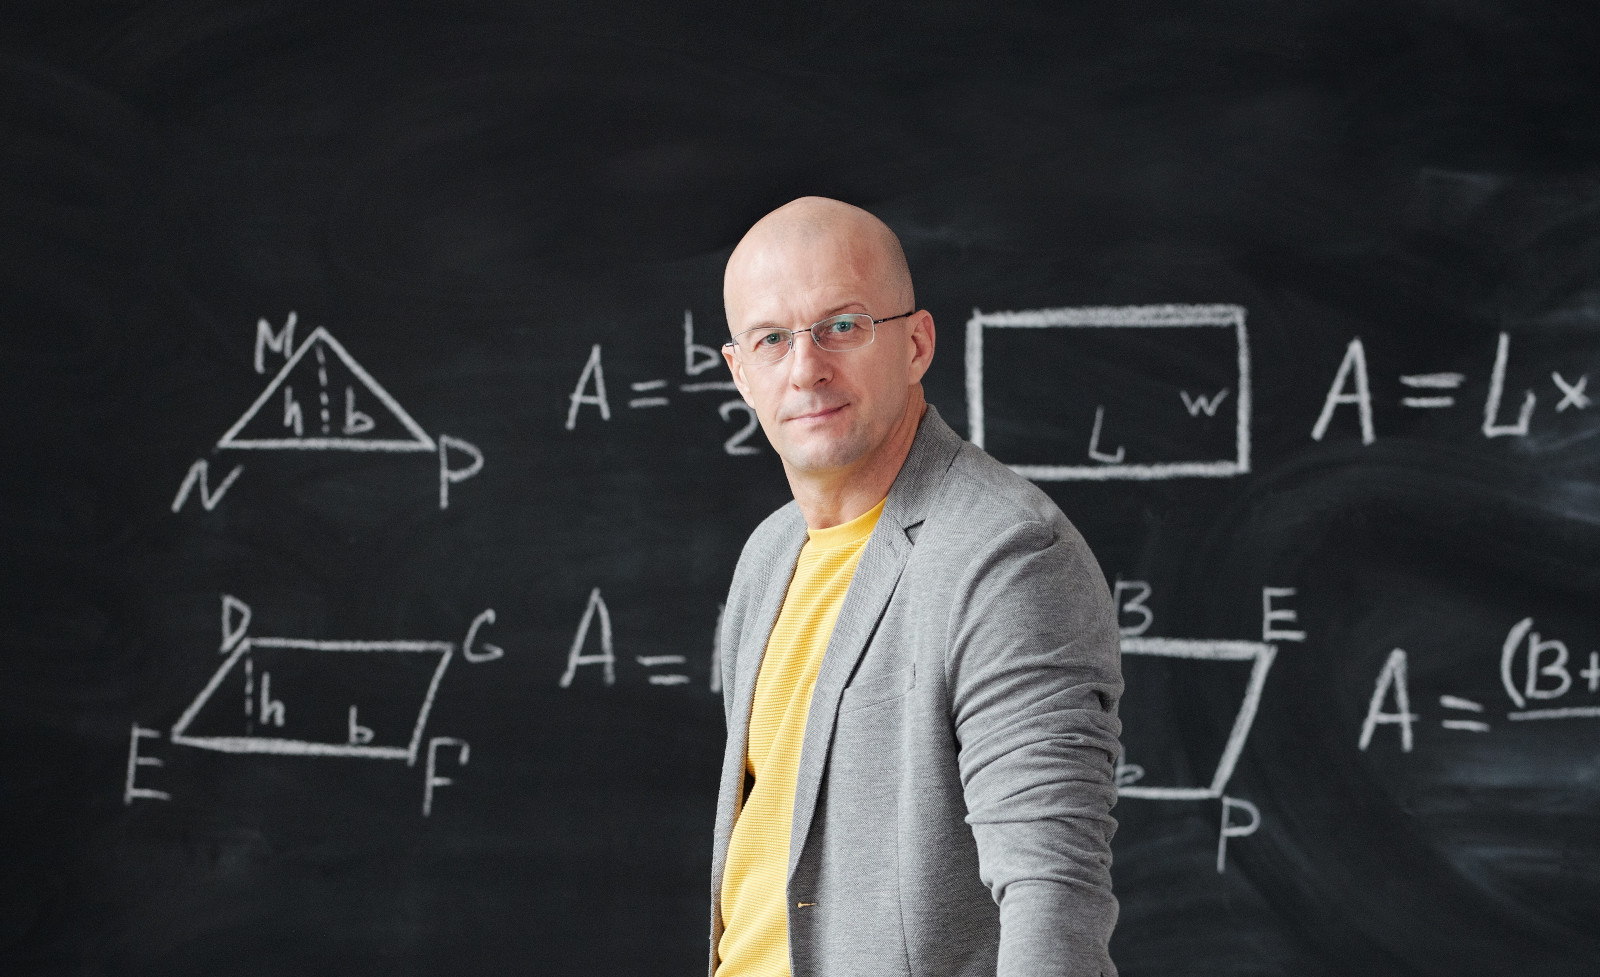 Man in front of blackboard with equations